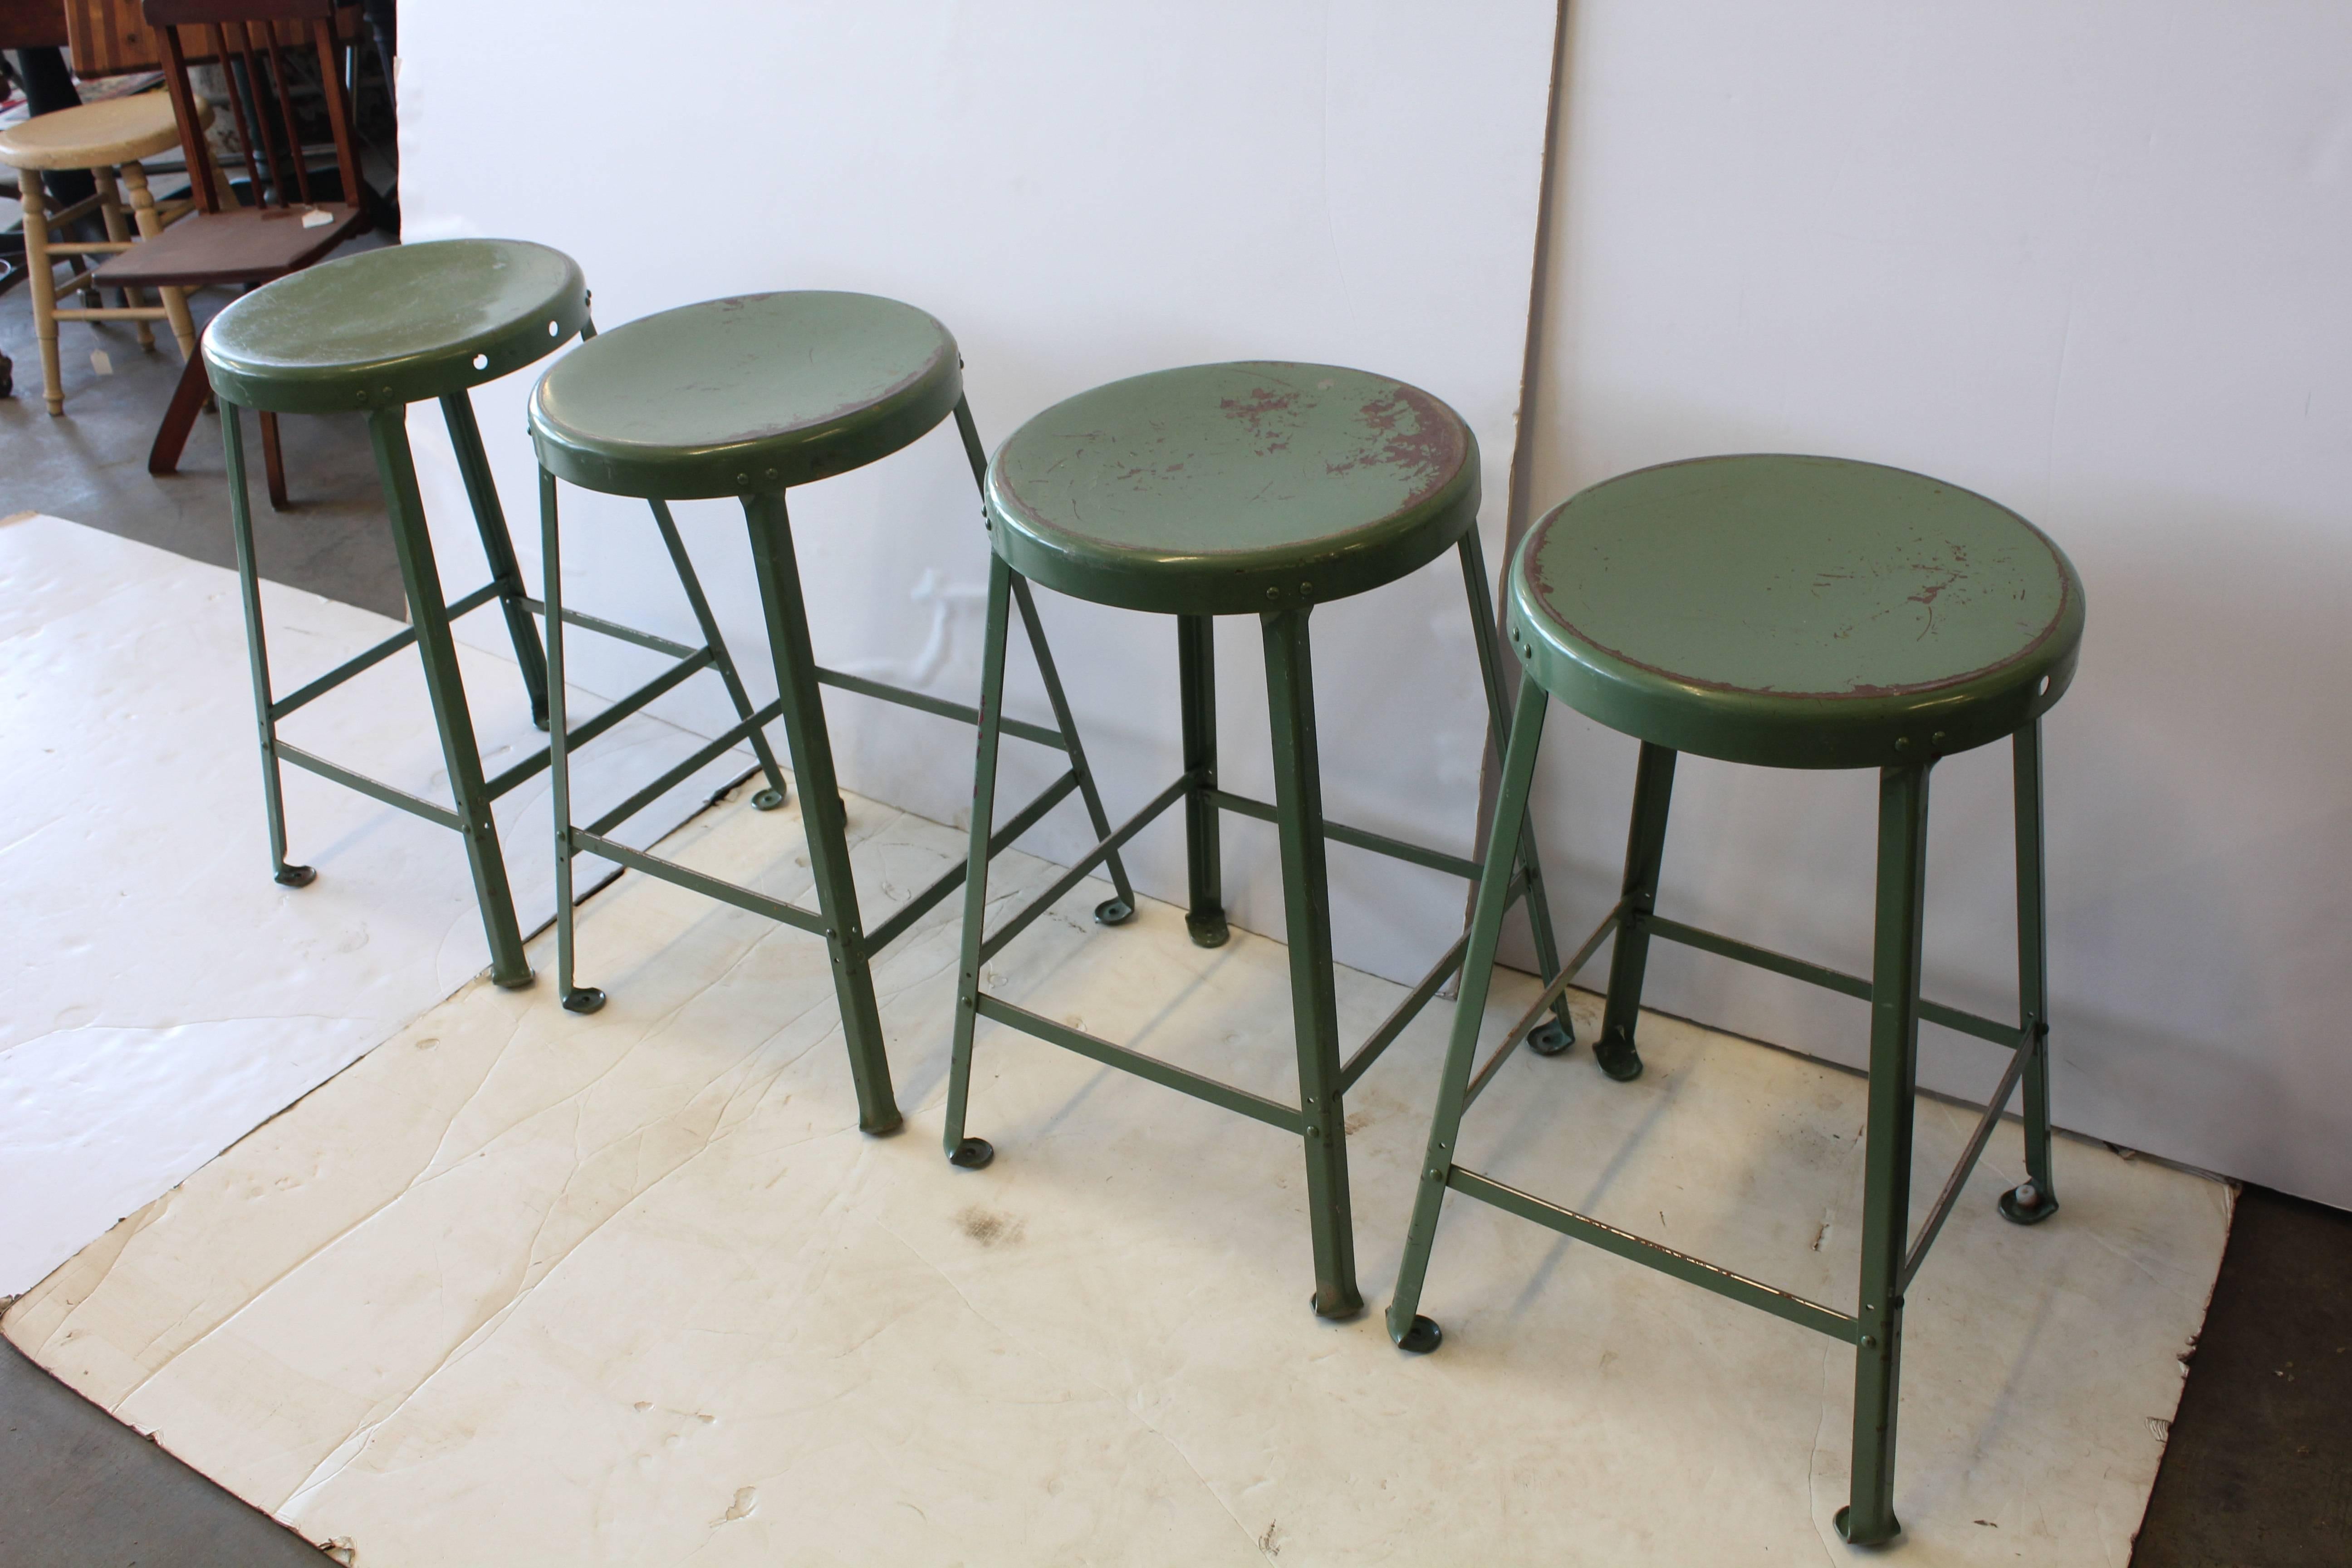 Vintage Industrial metal stools, 16 available. Listed price is for each stool.